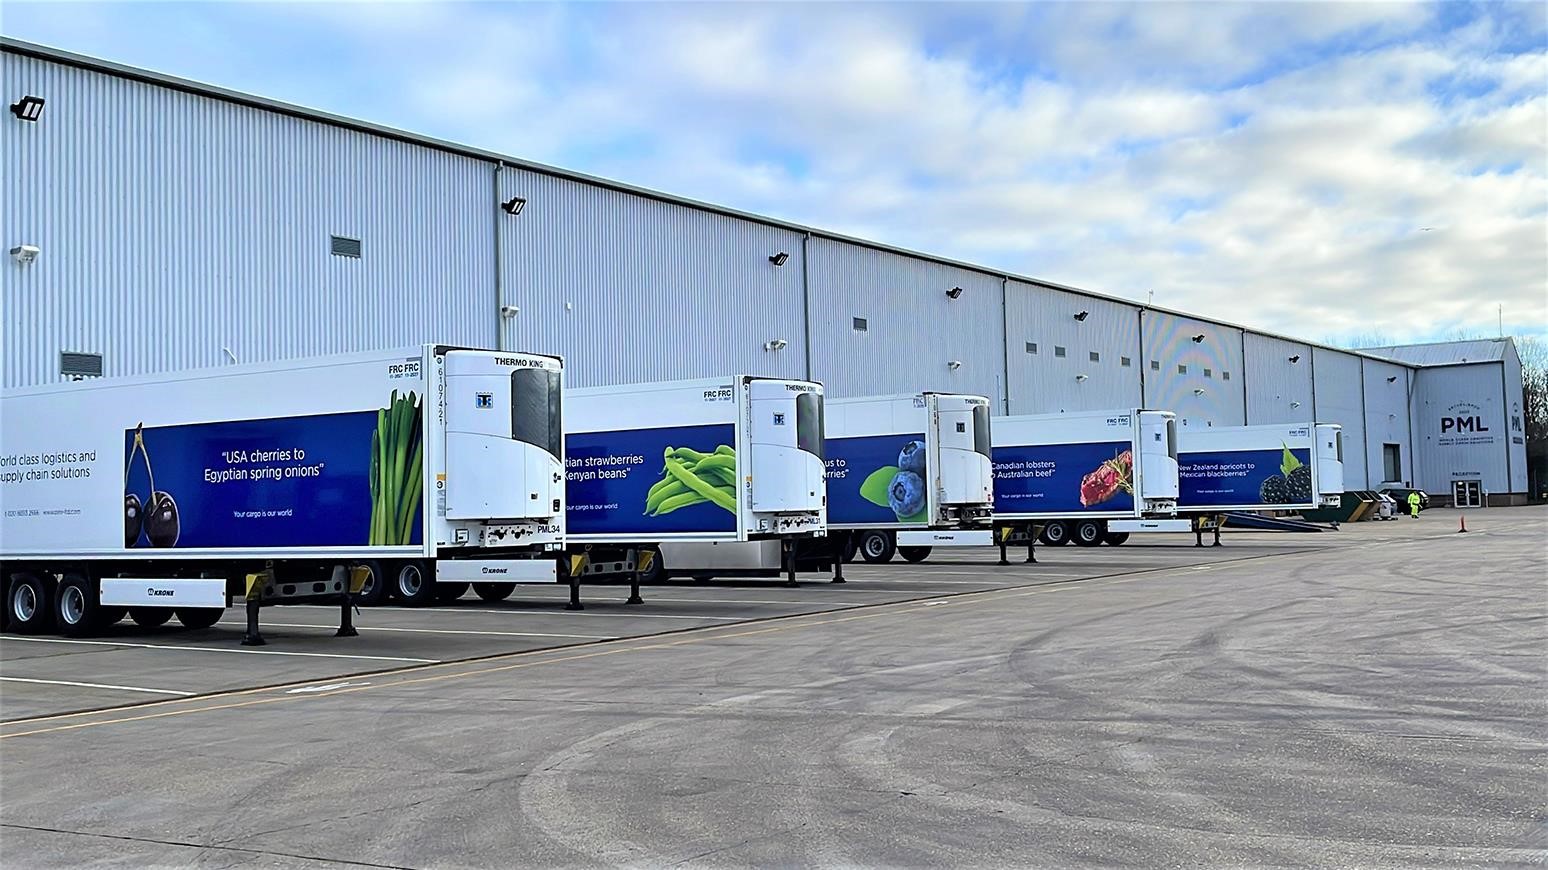 New Krone Cool Liner Refrigerated Semi-Trailers Part Of Port Logistics Expansion For PML